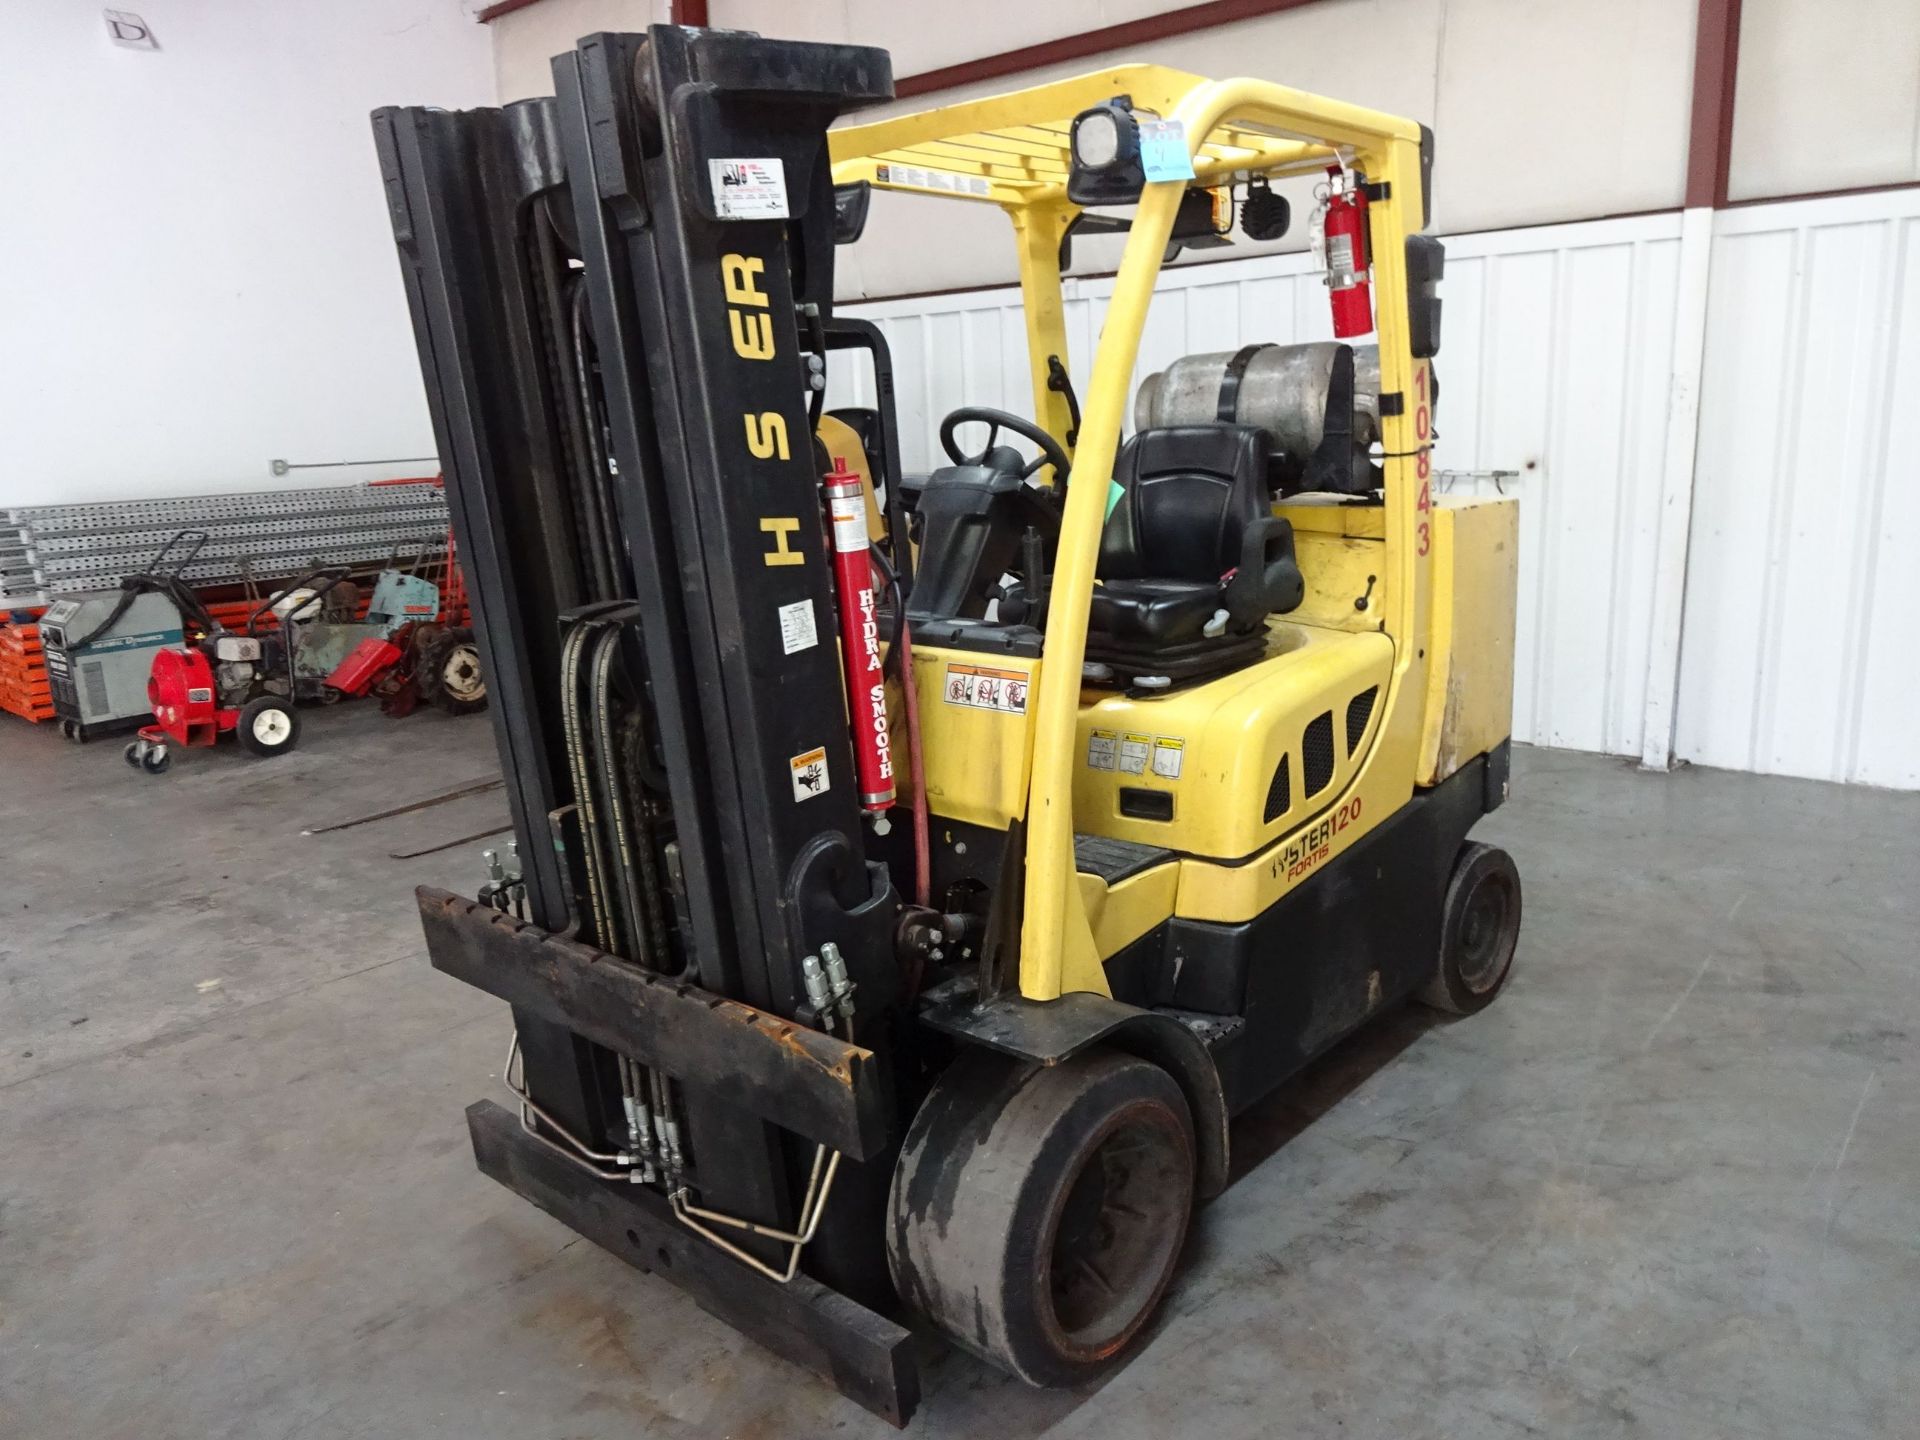 12,000 LB. HYSTER MODEL S120FTPRS SOLID TIRE LP GAS LIFT TRUCK; S/N G004V05749J (6,320 HOURS), 3-